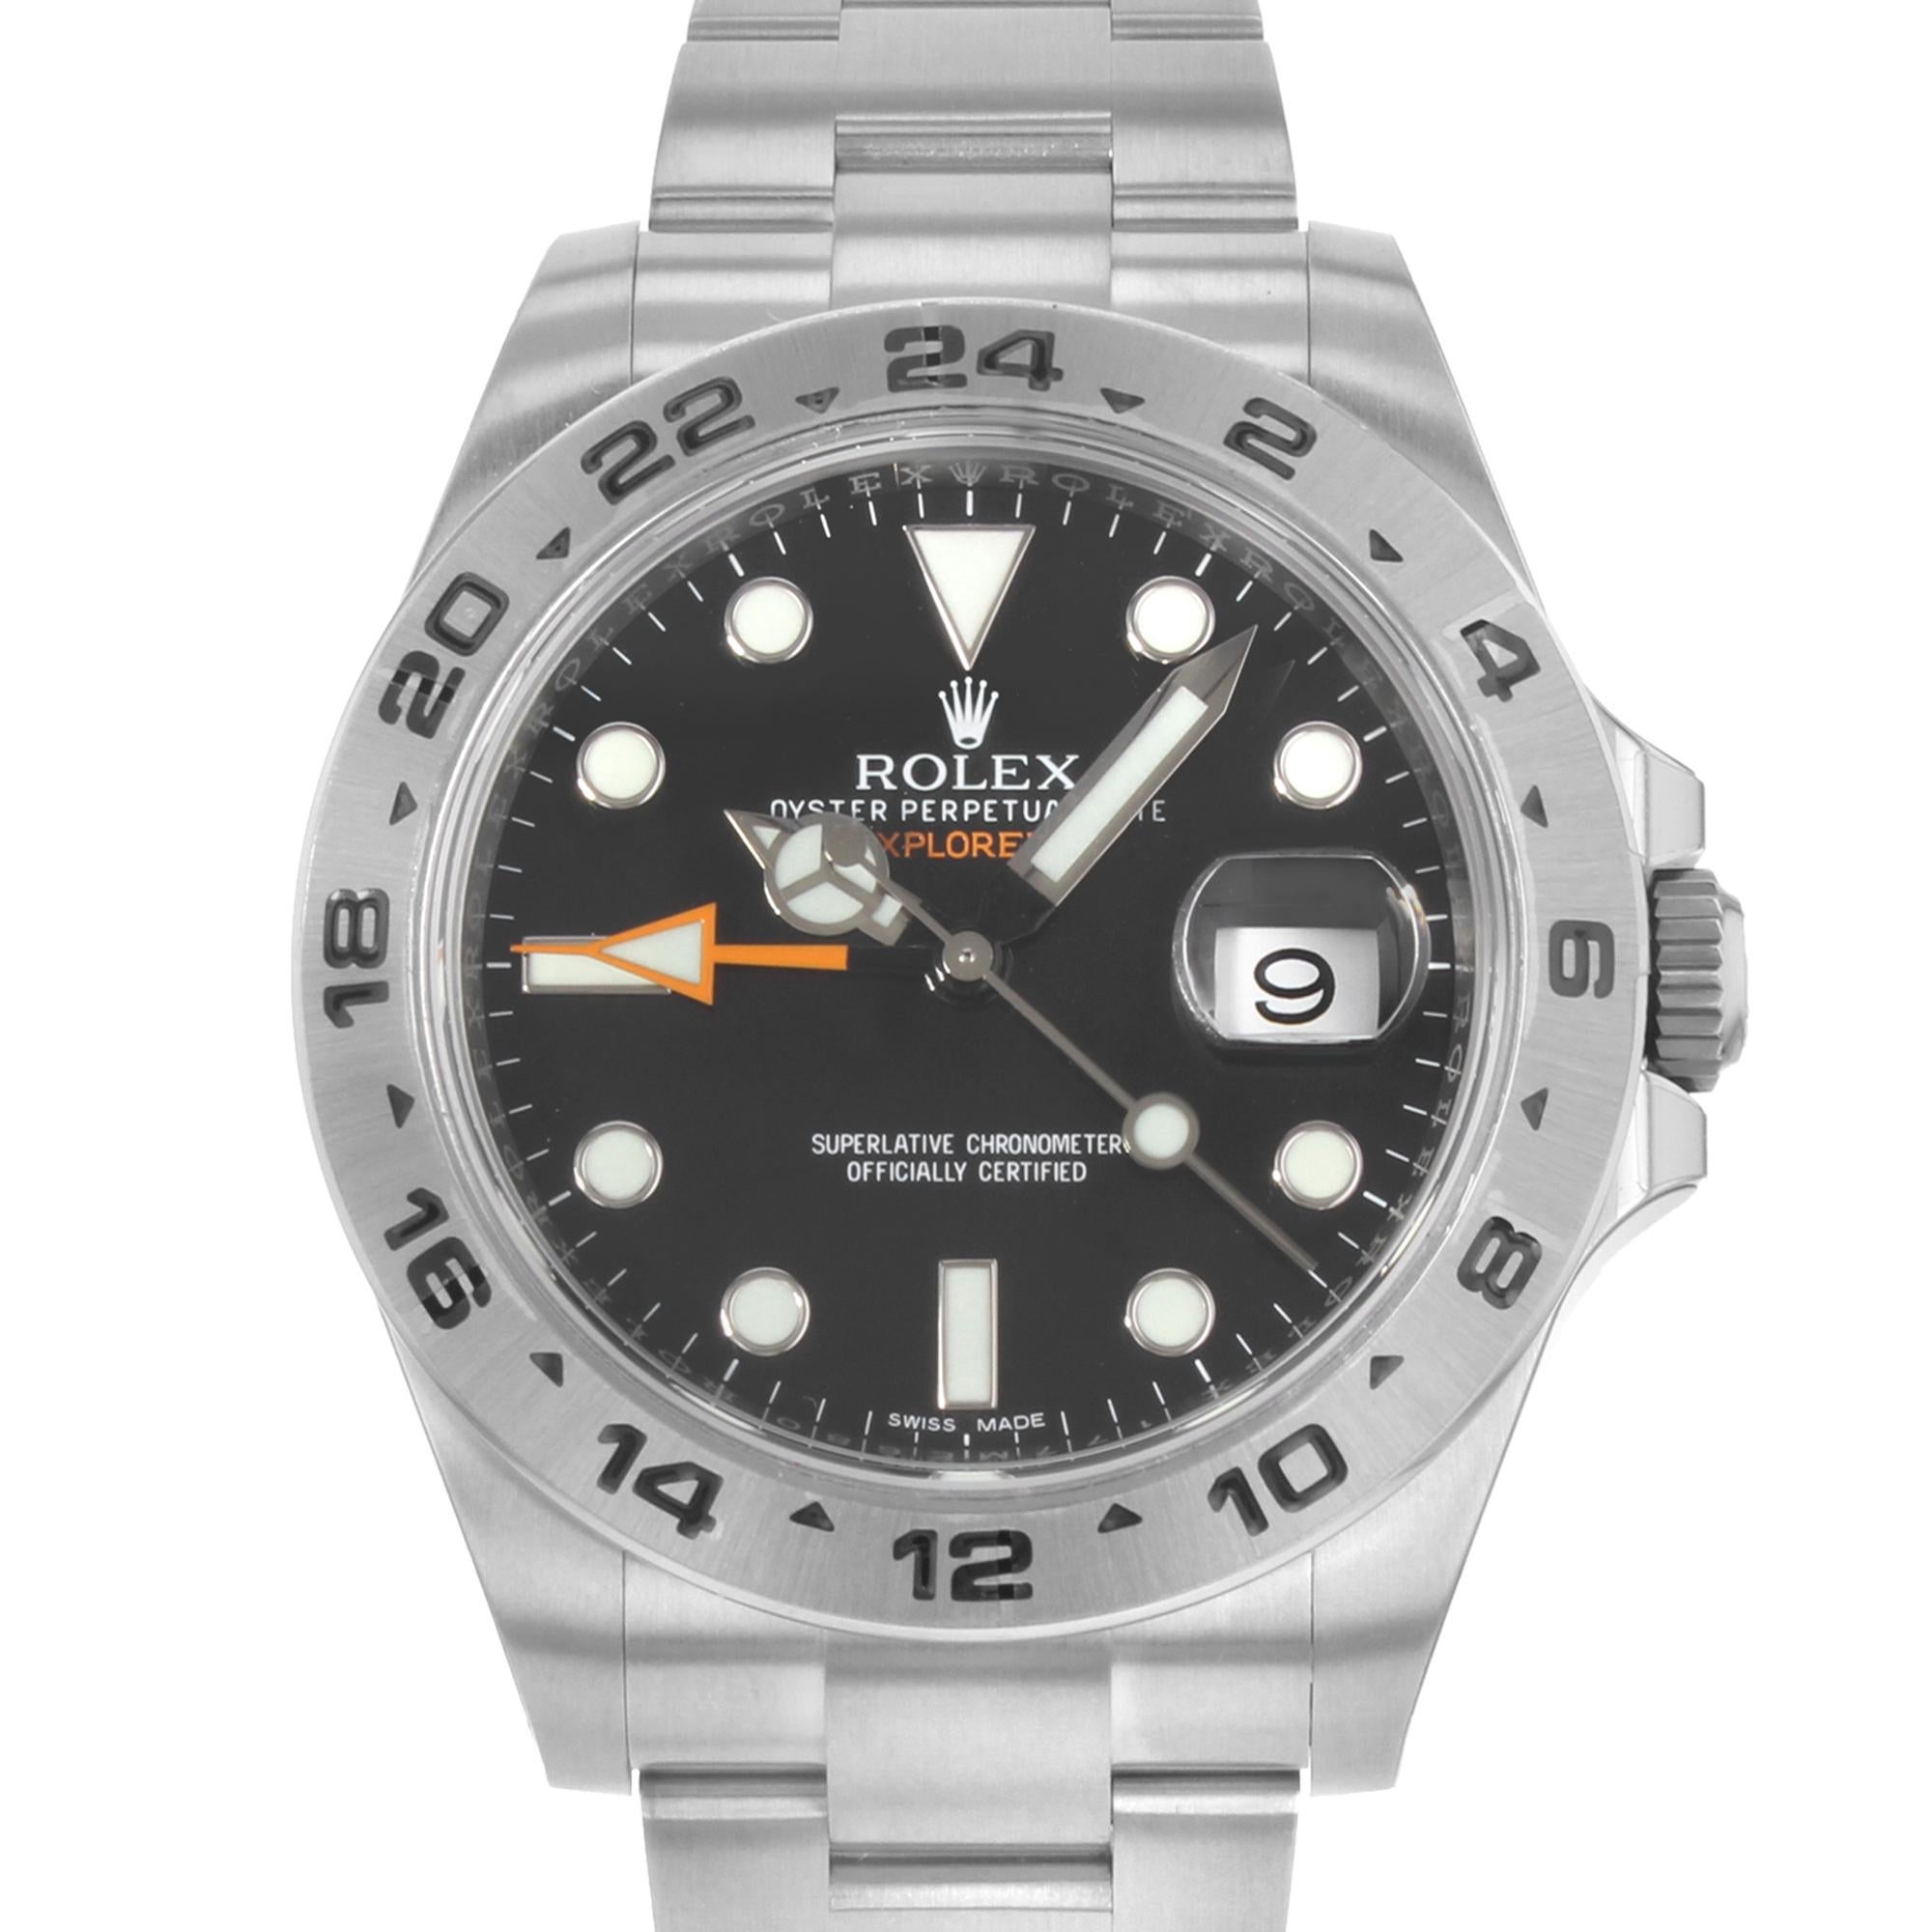 This display model Rolex Explorer II  216570 is a beautiful men's timepiece that is powered by an automatic movement which is cased in a stainless steel case. It has a round shape face, date, dual time dial, and has hand sticks & dots style markers.